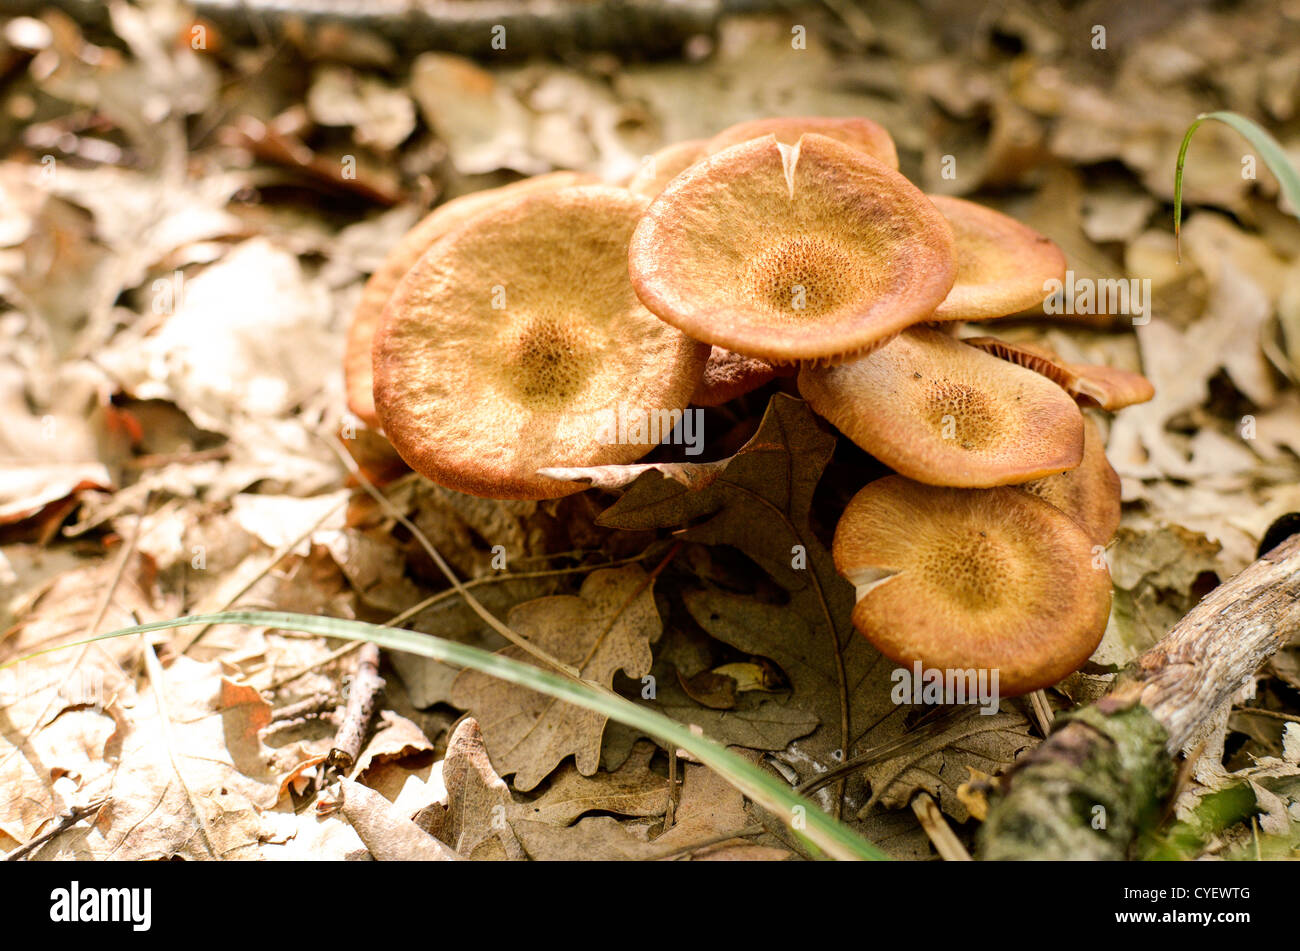 Wild mushrooms in Italy in an autumnal day Stock Photo